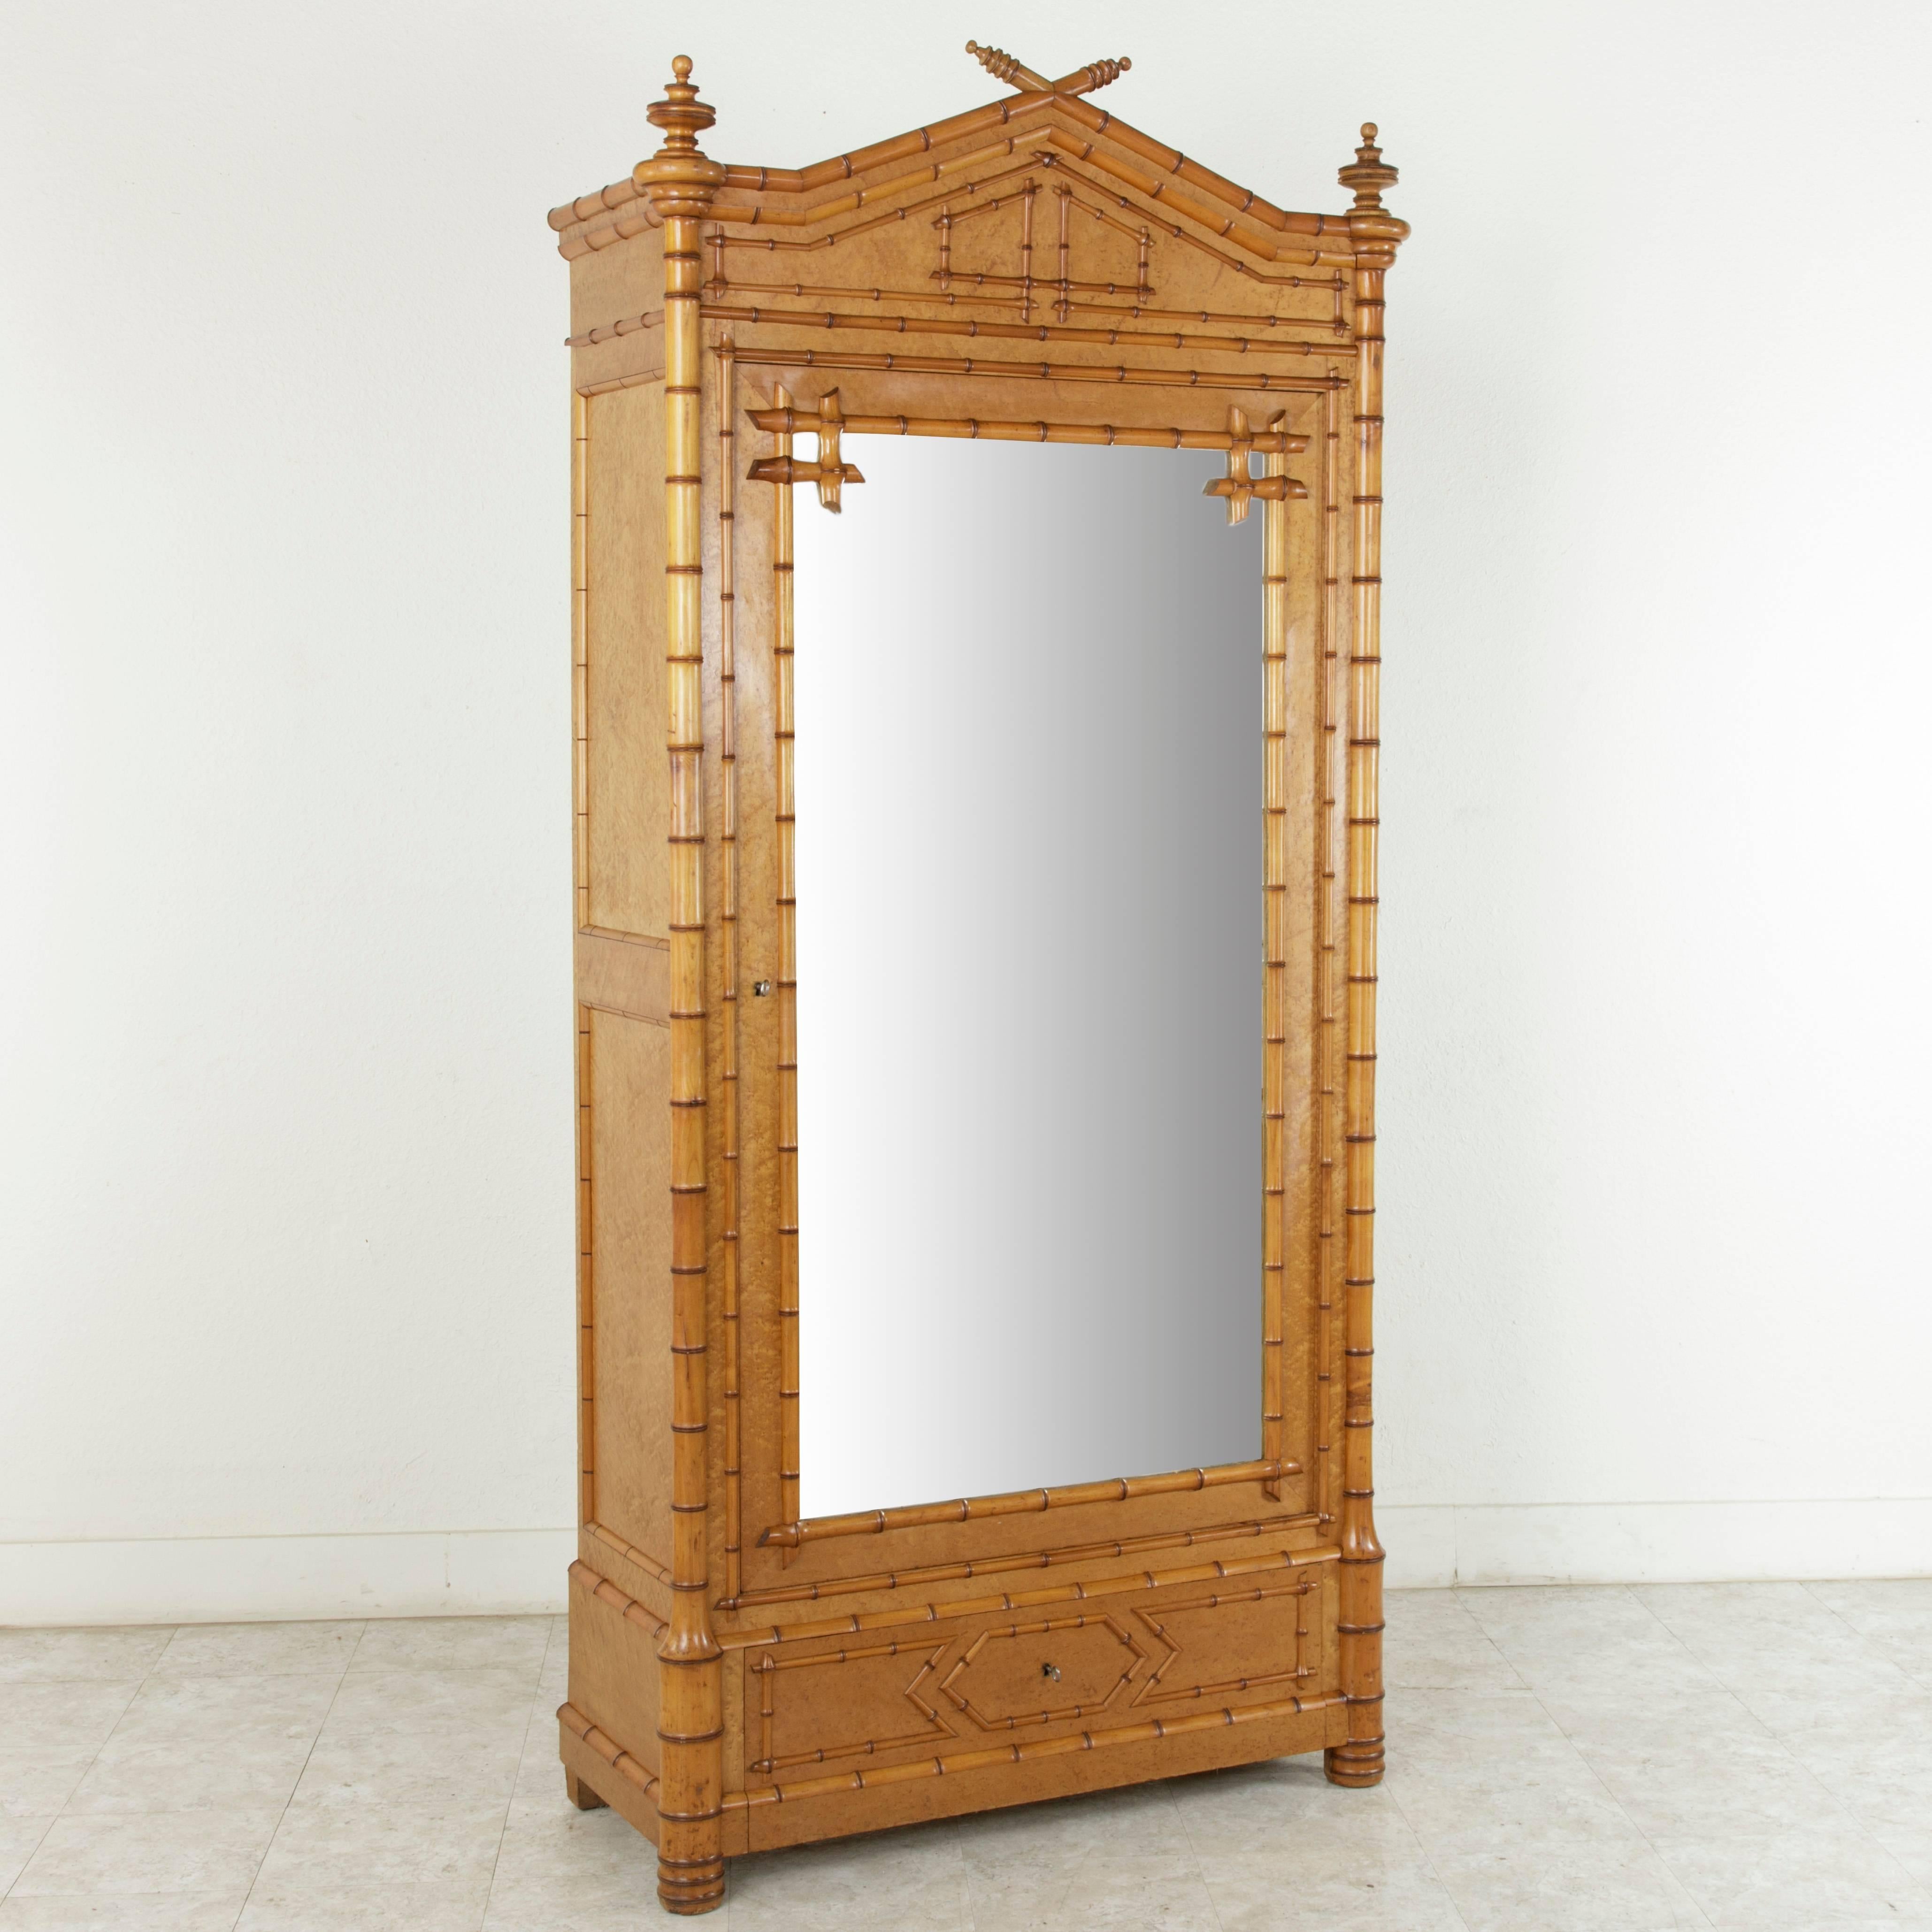 This faux bamboo armoire made of cherrywood and bird's-eye maple is in absolutely pristine condition. Finely detailed bamboo pieces, harmoniously laid in a uniform pattern, blend with the handsome geometric motif in the upper pediment and lower